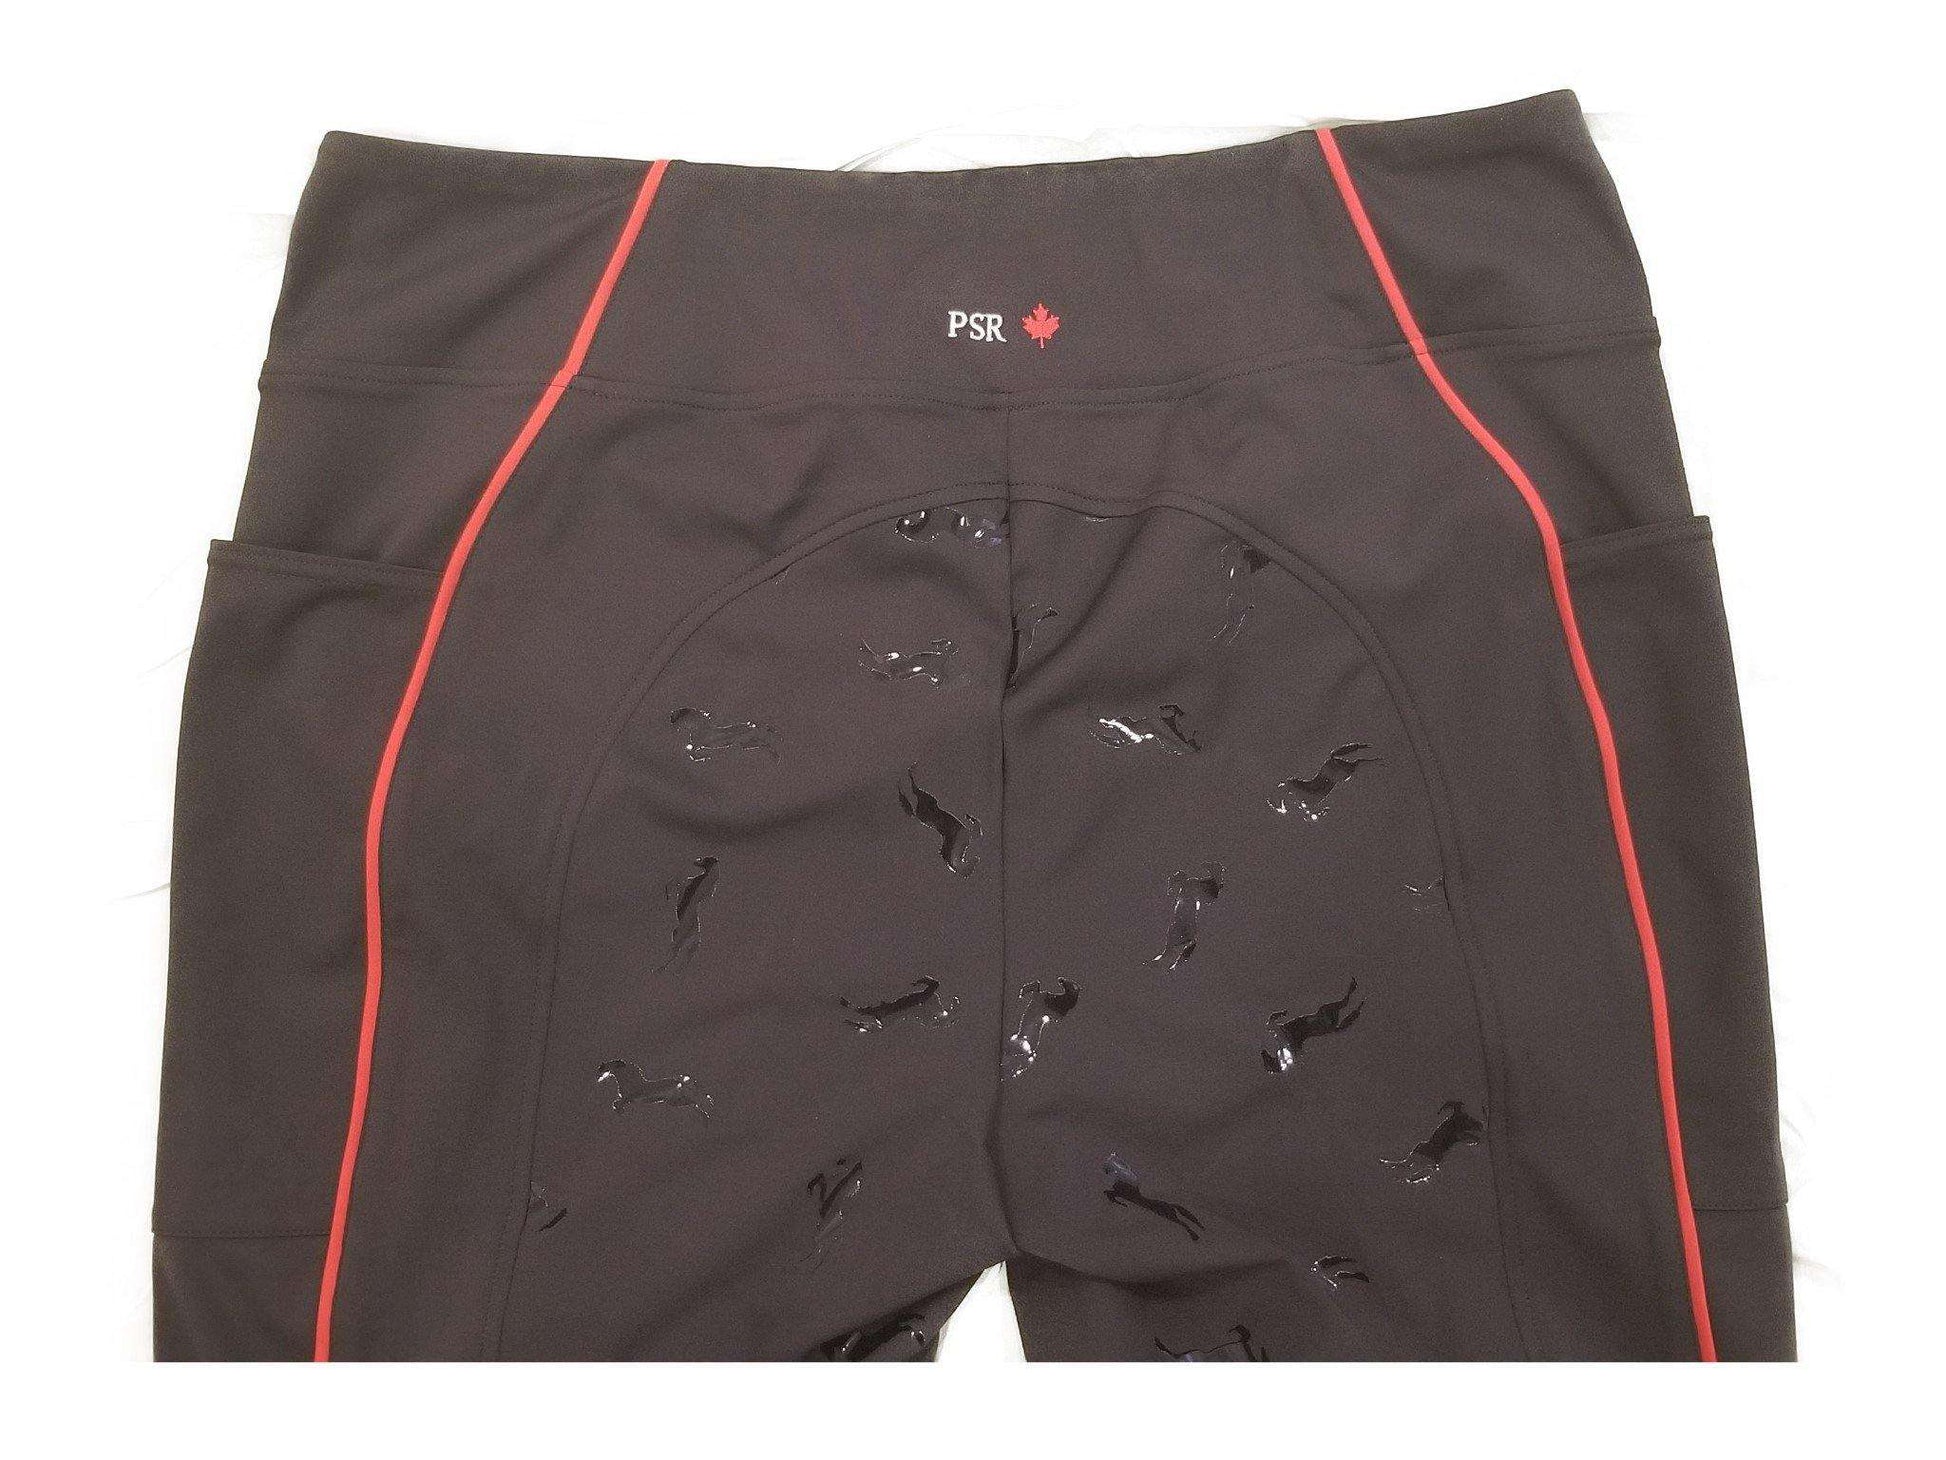 psr riding tights - black with red stripe